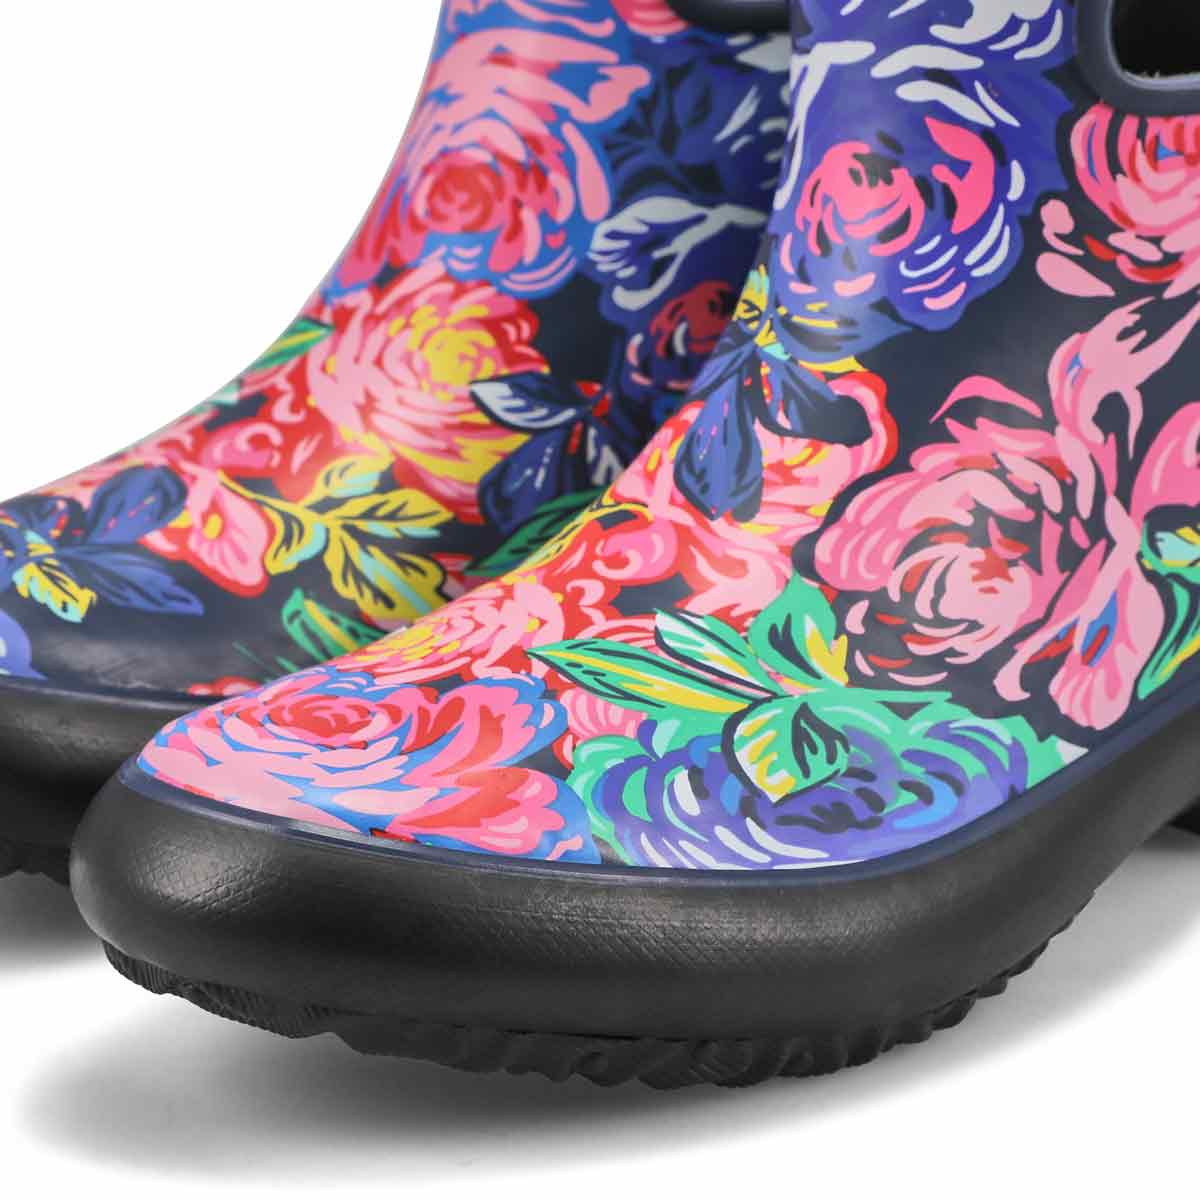 Women's Patch Ankle Rain Boot - Rose Multi